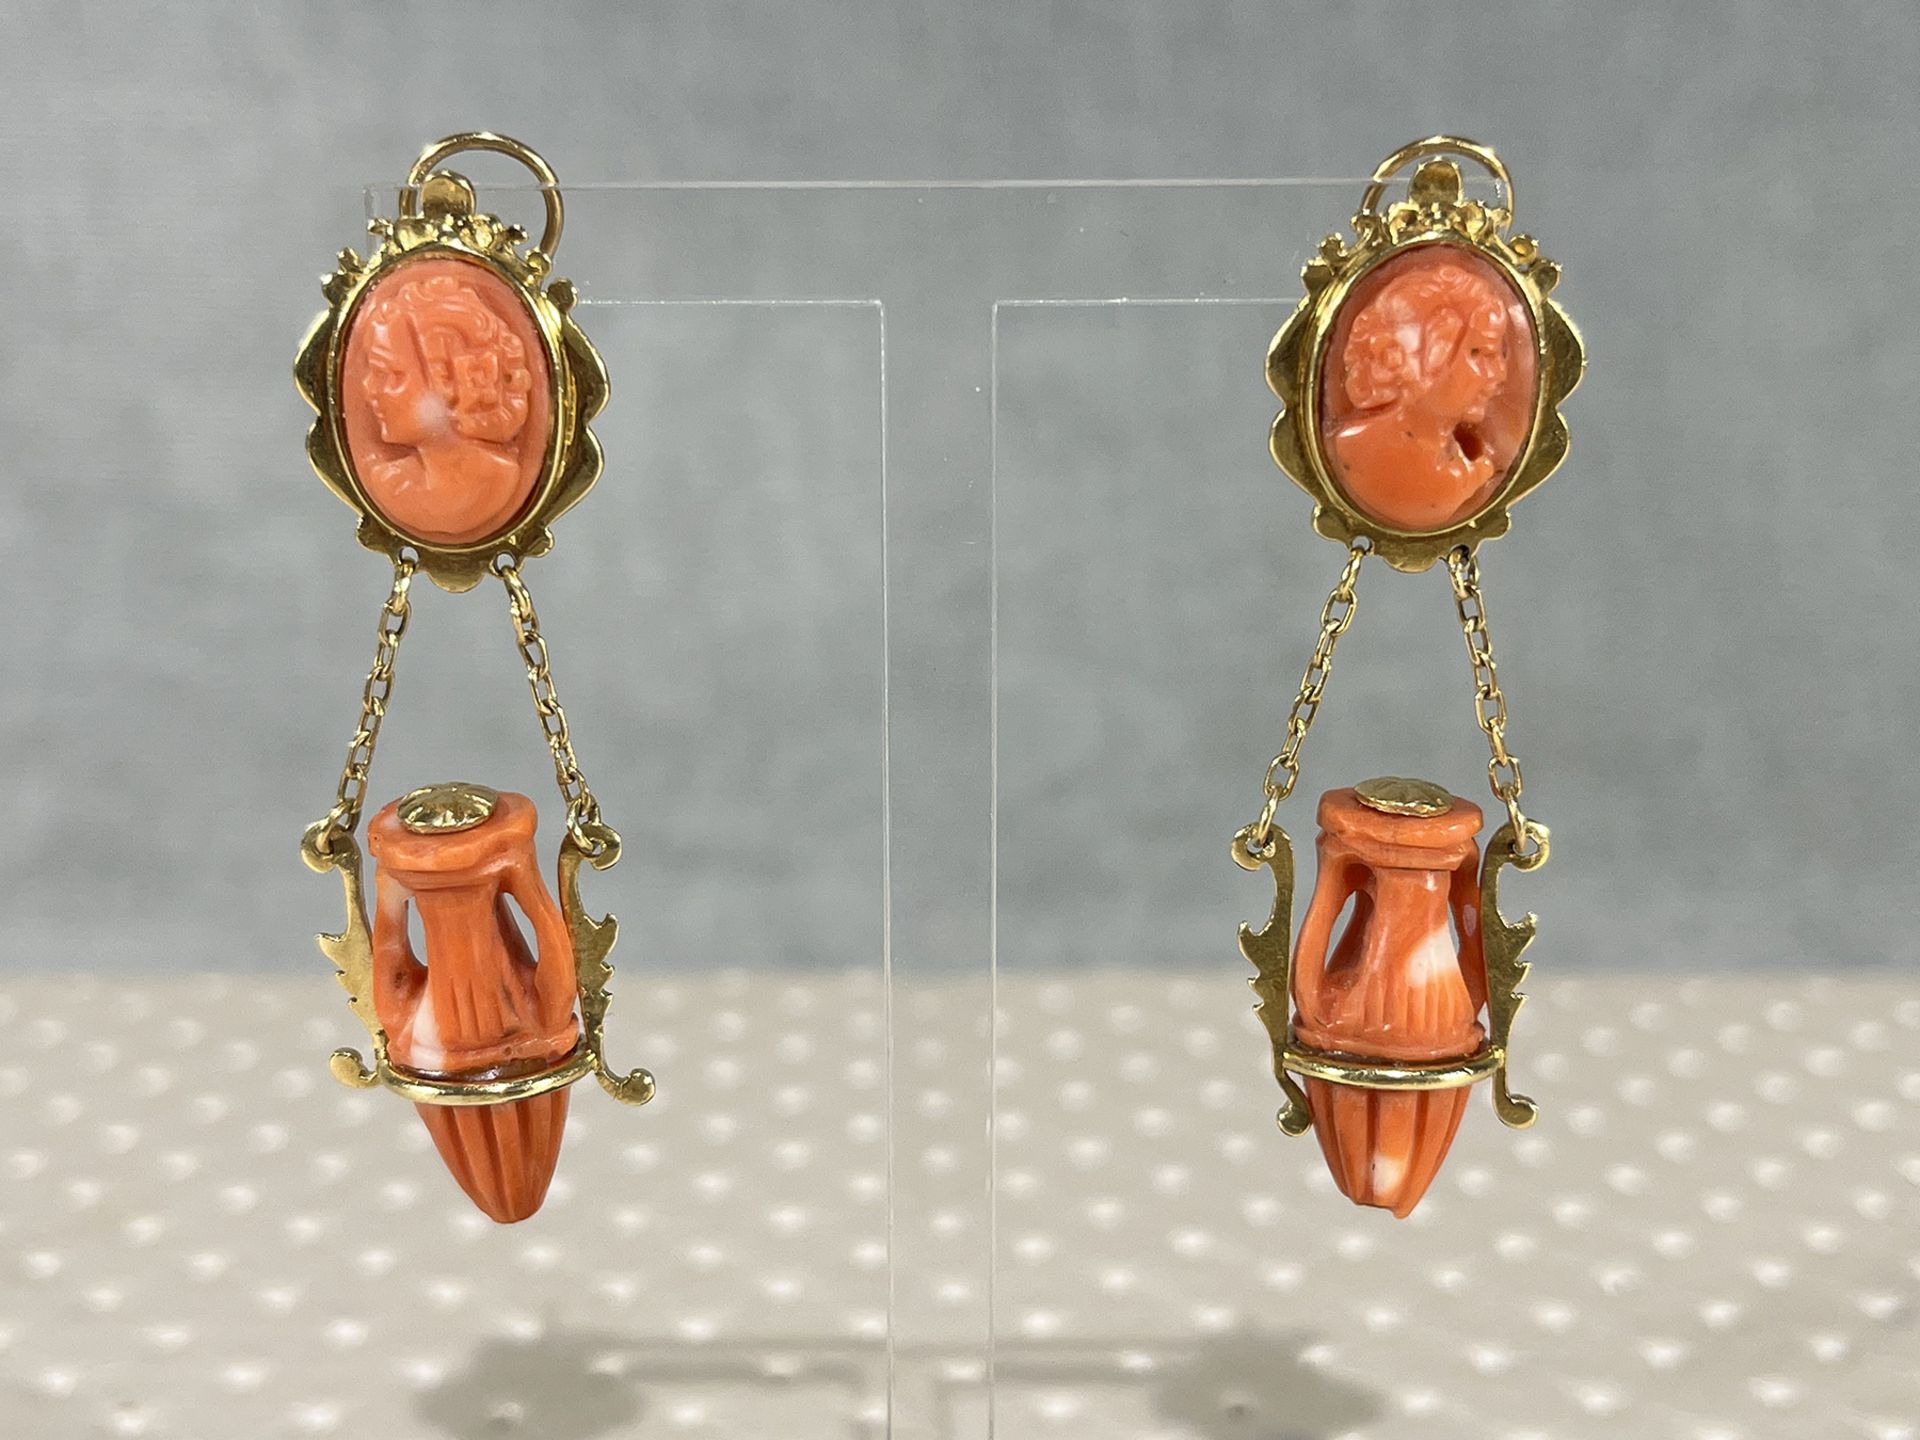 Spanish earrings with cameos and Mediterranean Coral amphoras mounted in 18k gold